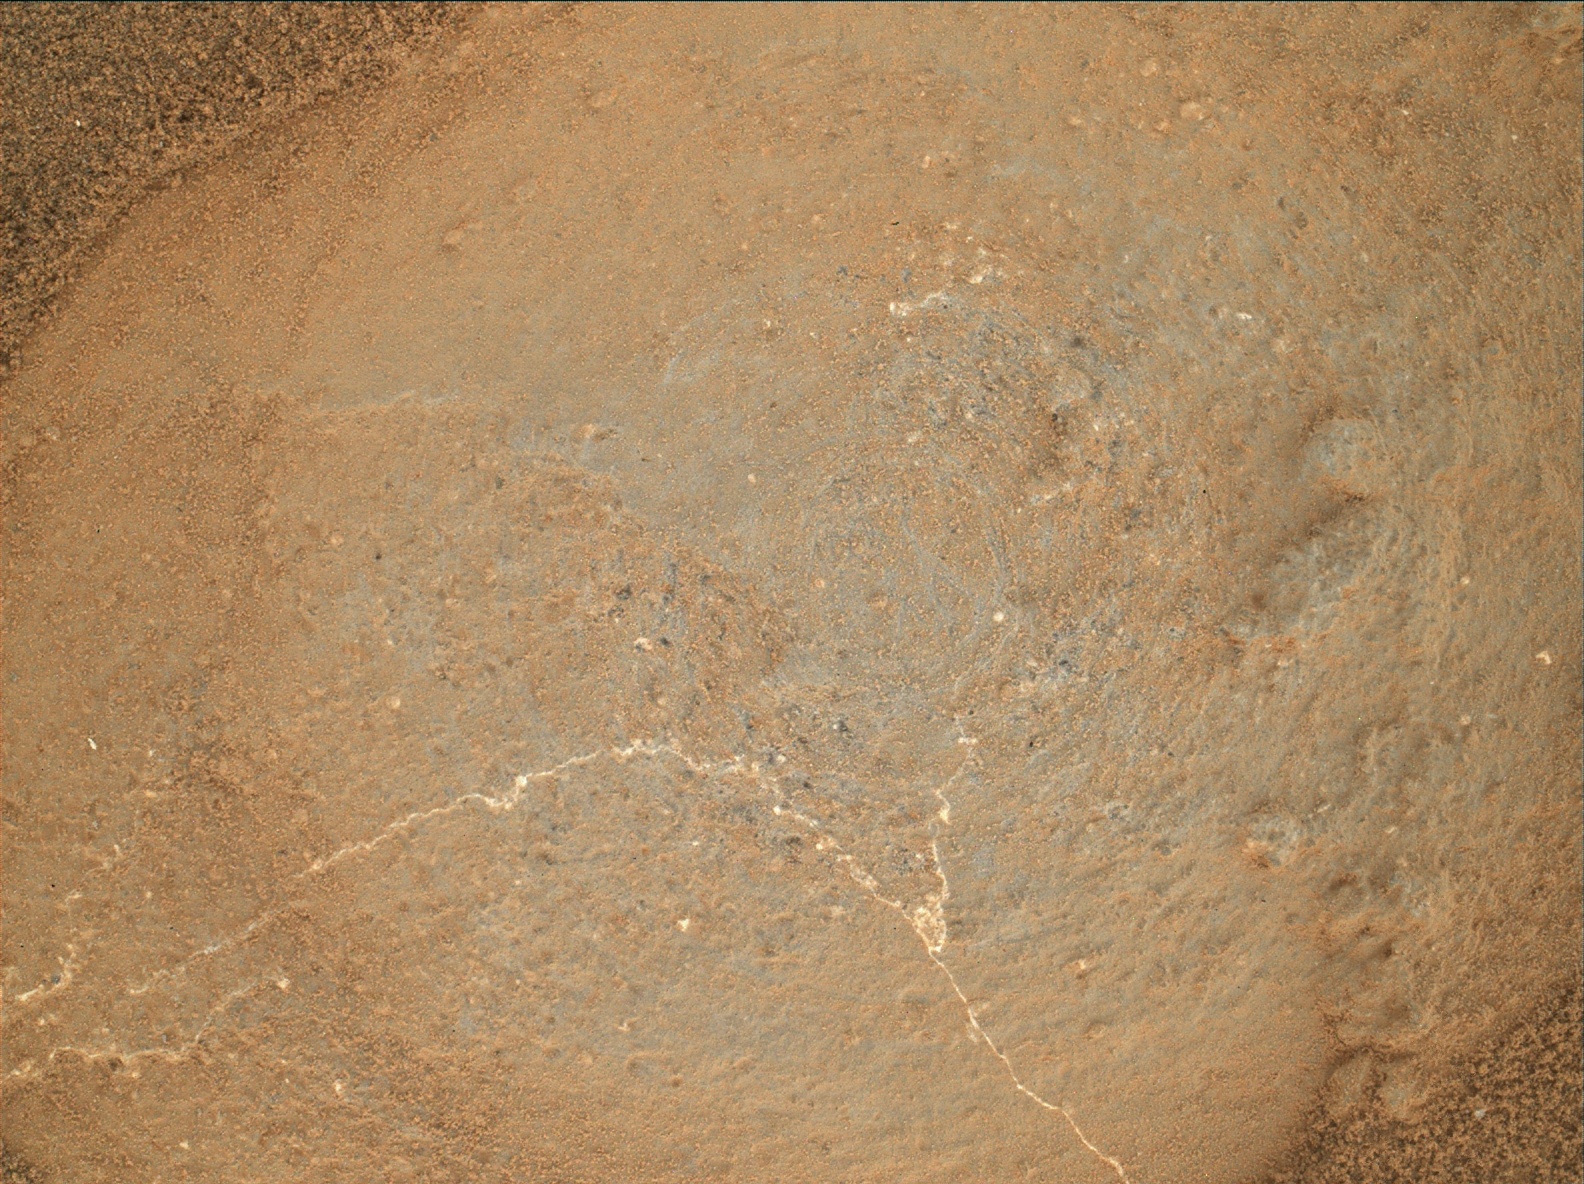 Nasa's Mars rover Curiosity acquired this image using its Mars Hand Lens Imager (MAHLI) on Sol 722